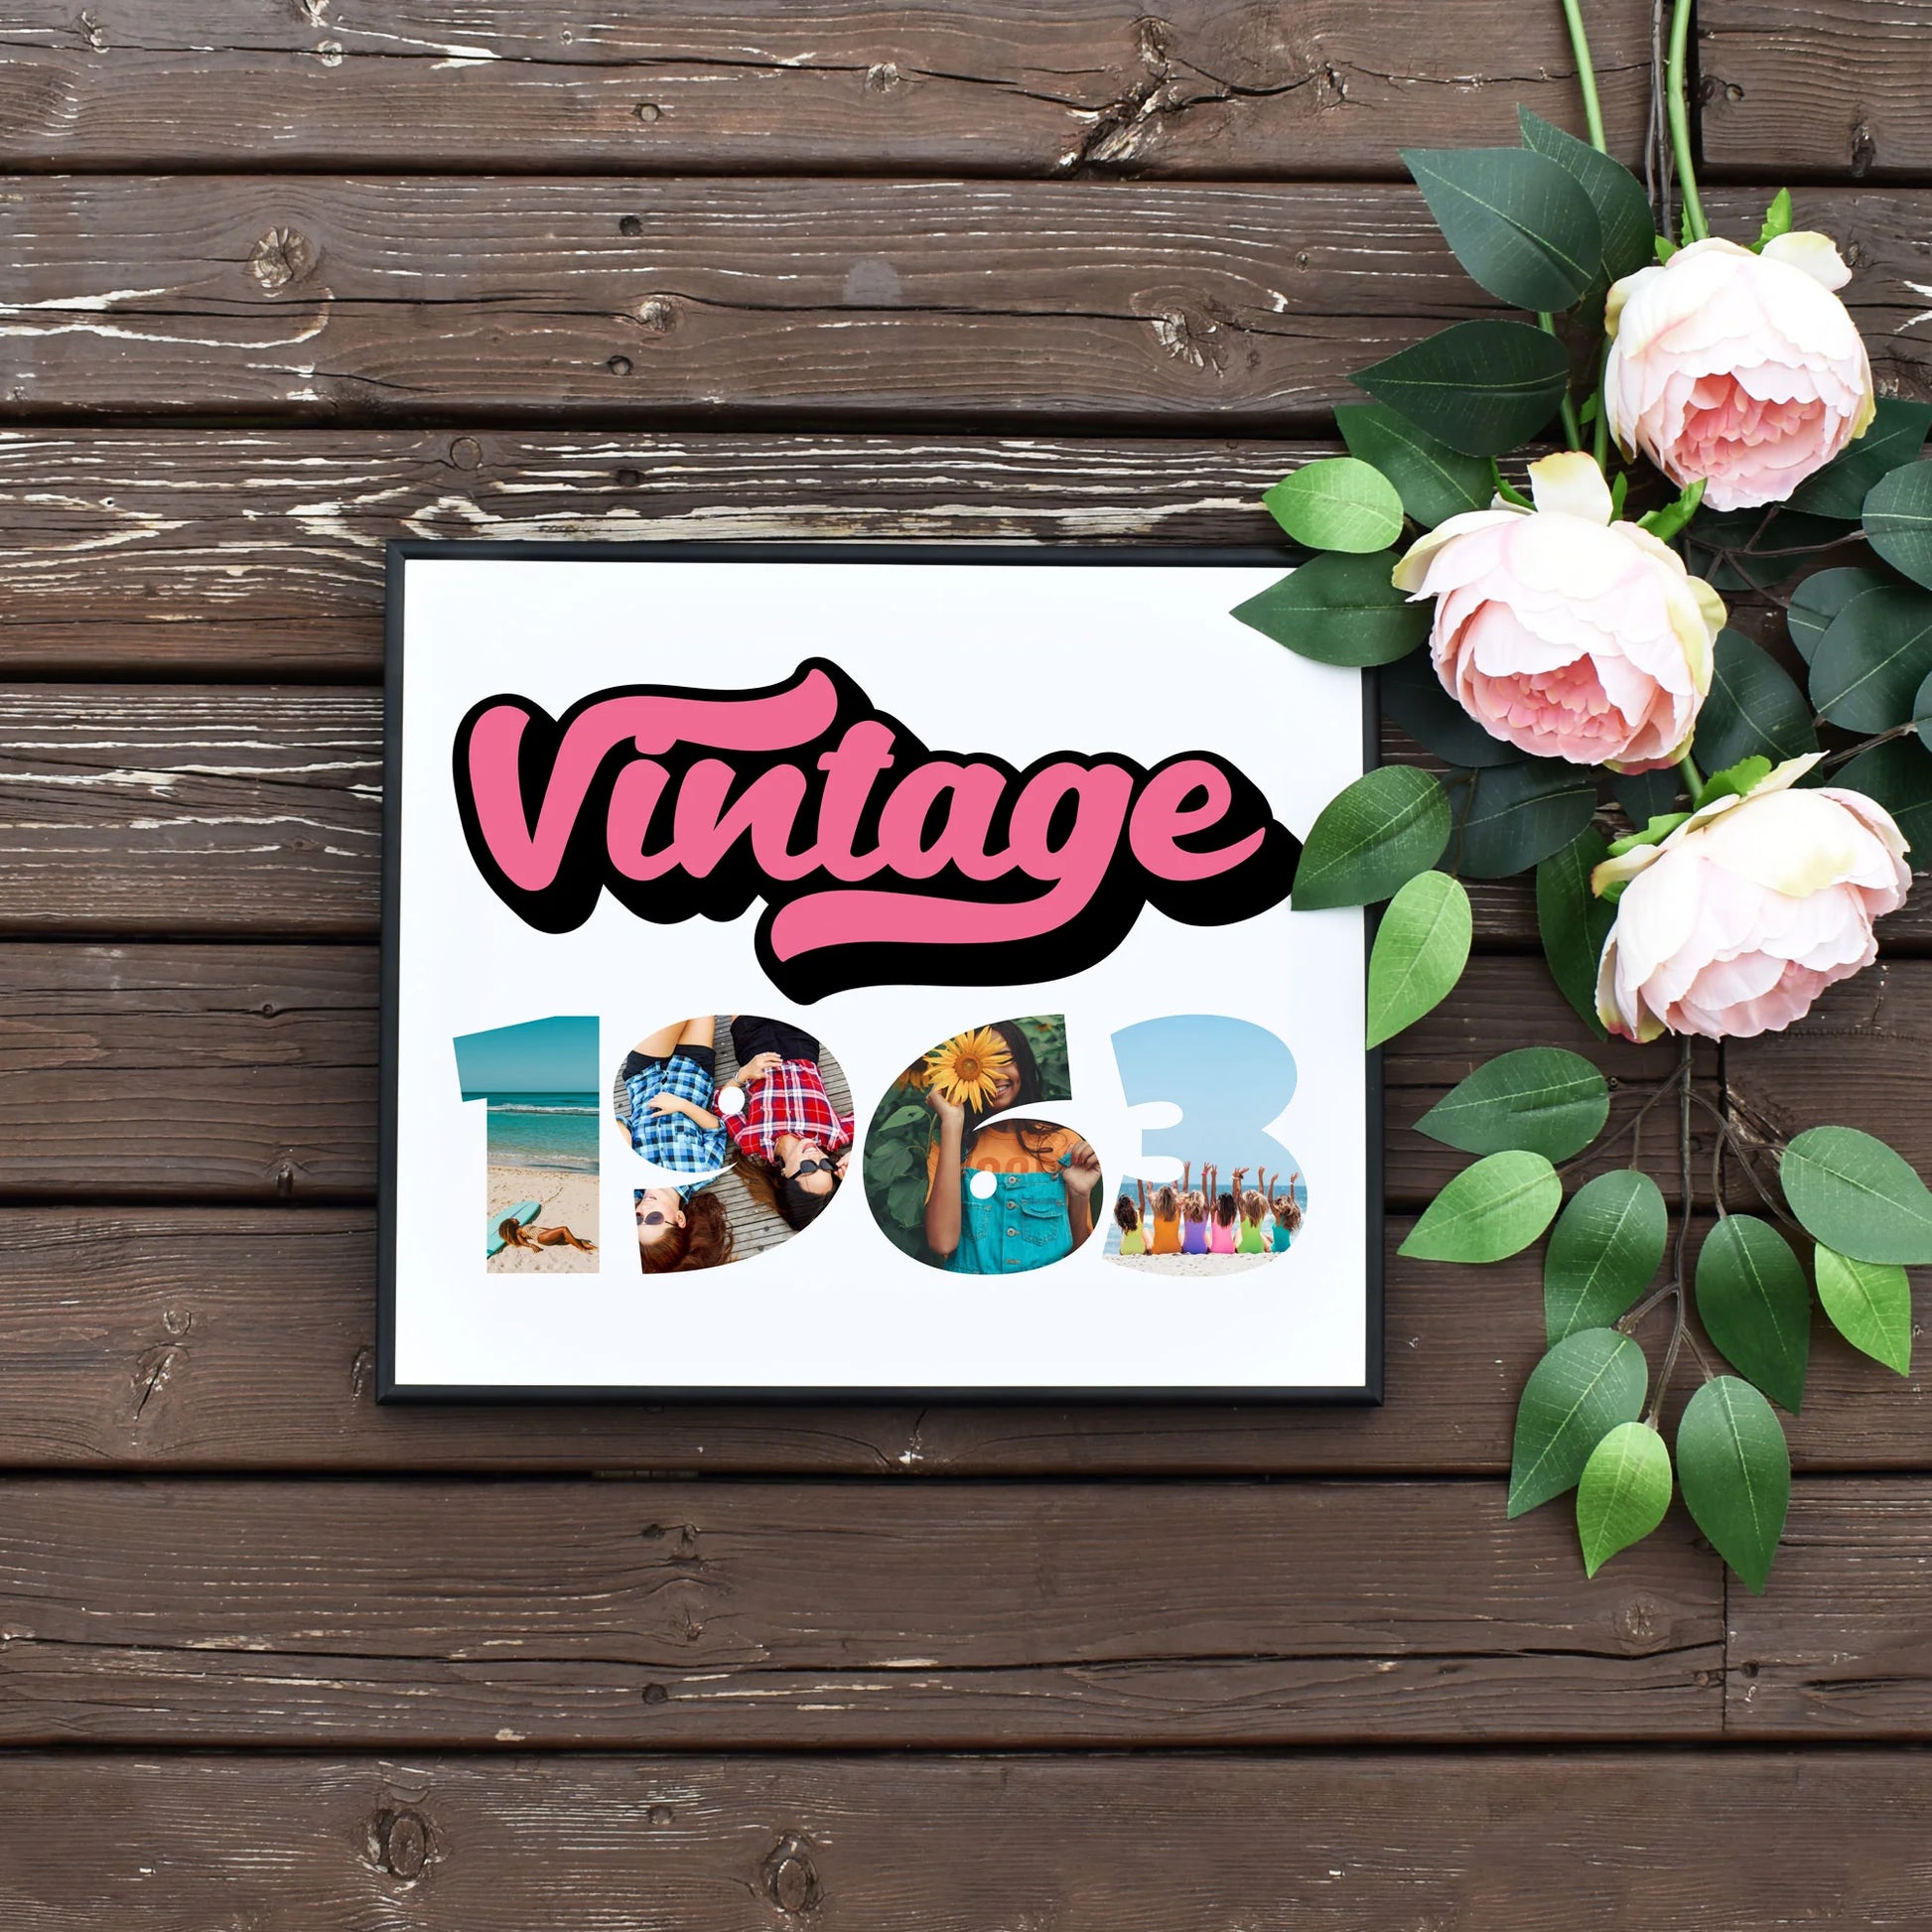 Editable Vintage 1963 Collage Template by Playful Pixie Studio